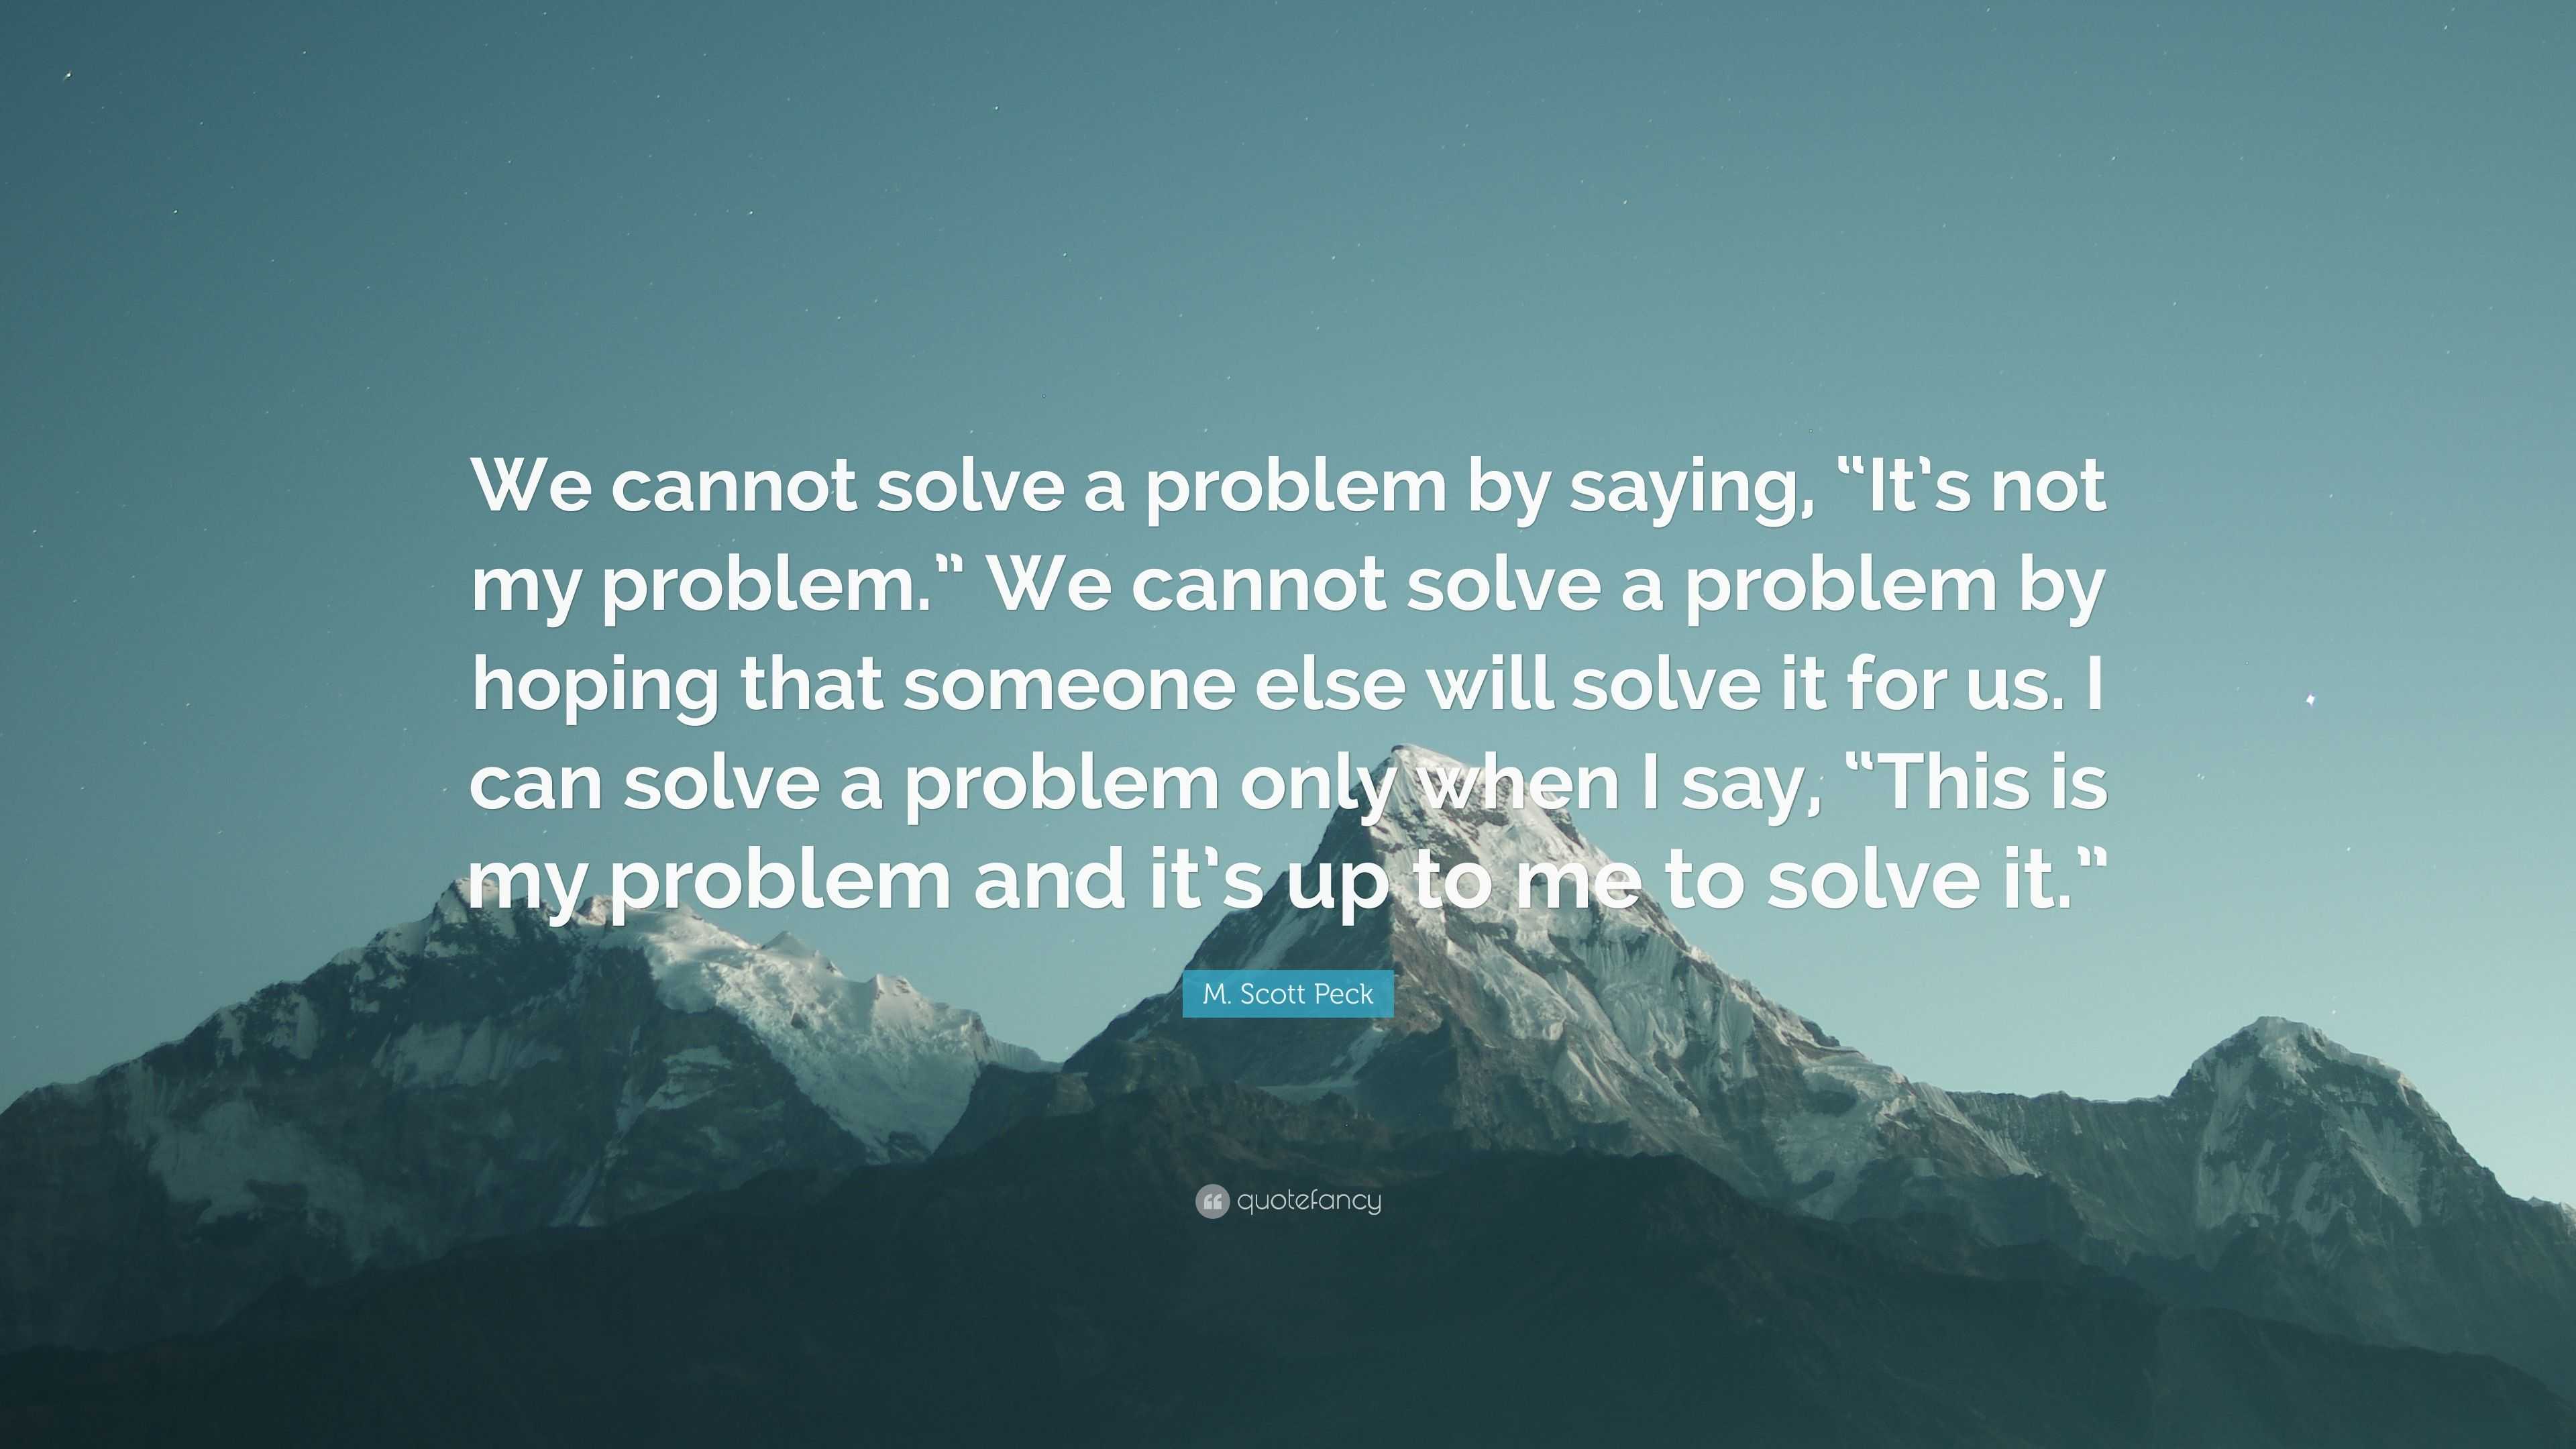 M. Scott Peck Quote: “We cannot solve a problem by saying, “It’s not my ...